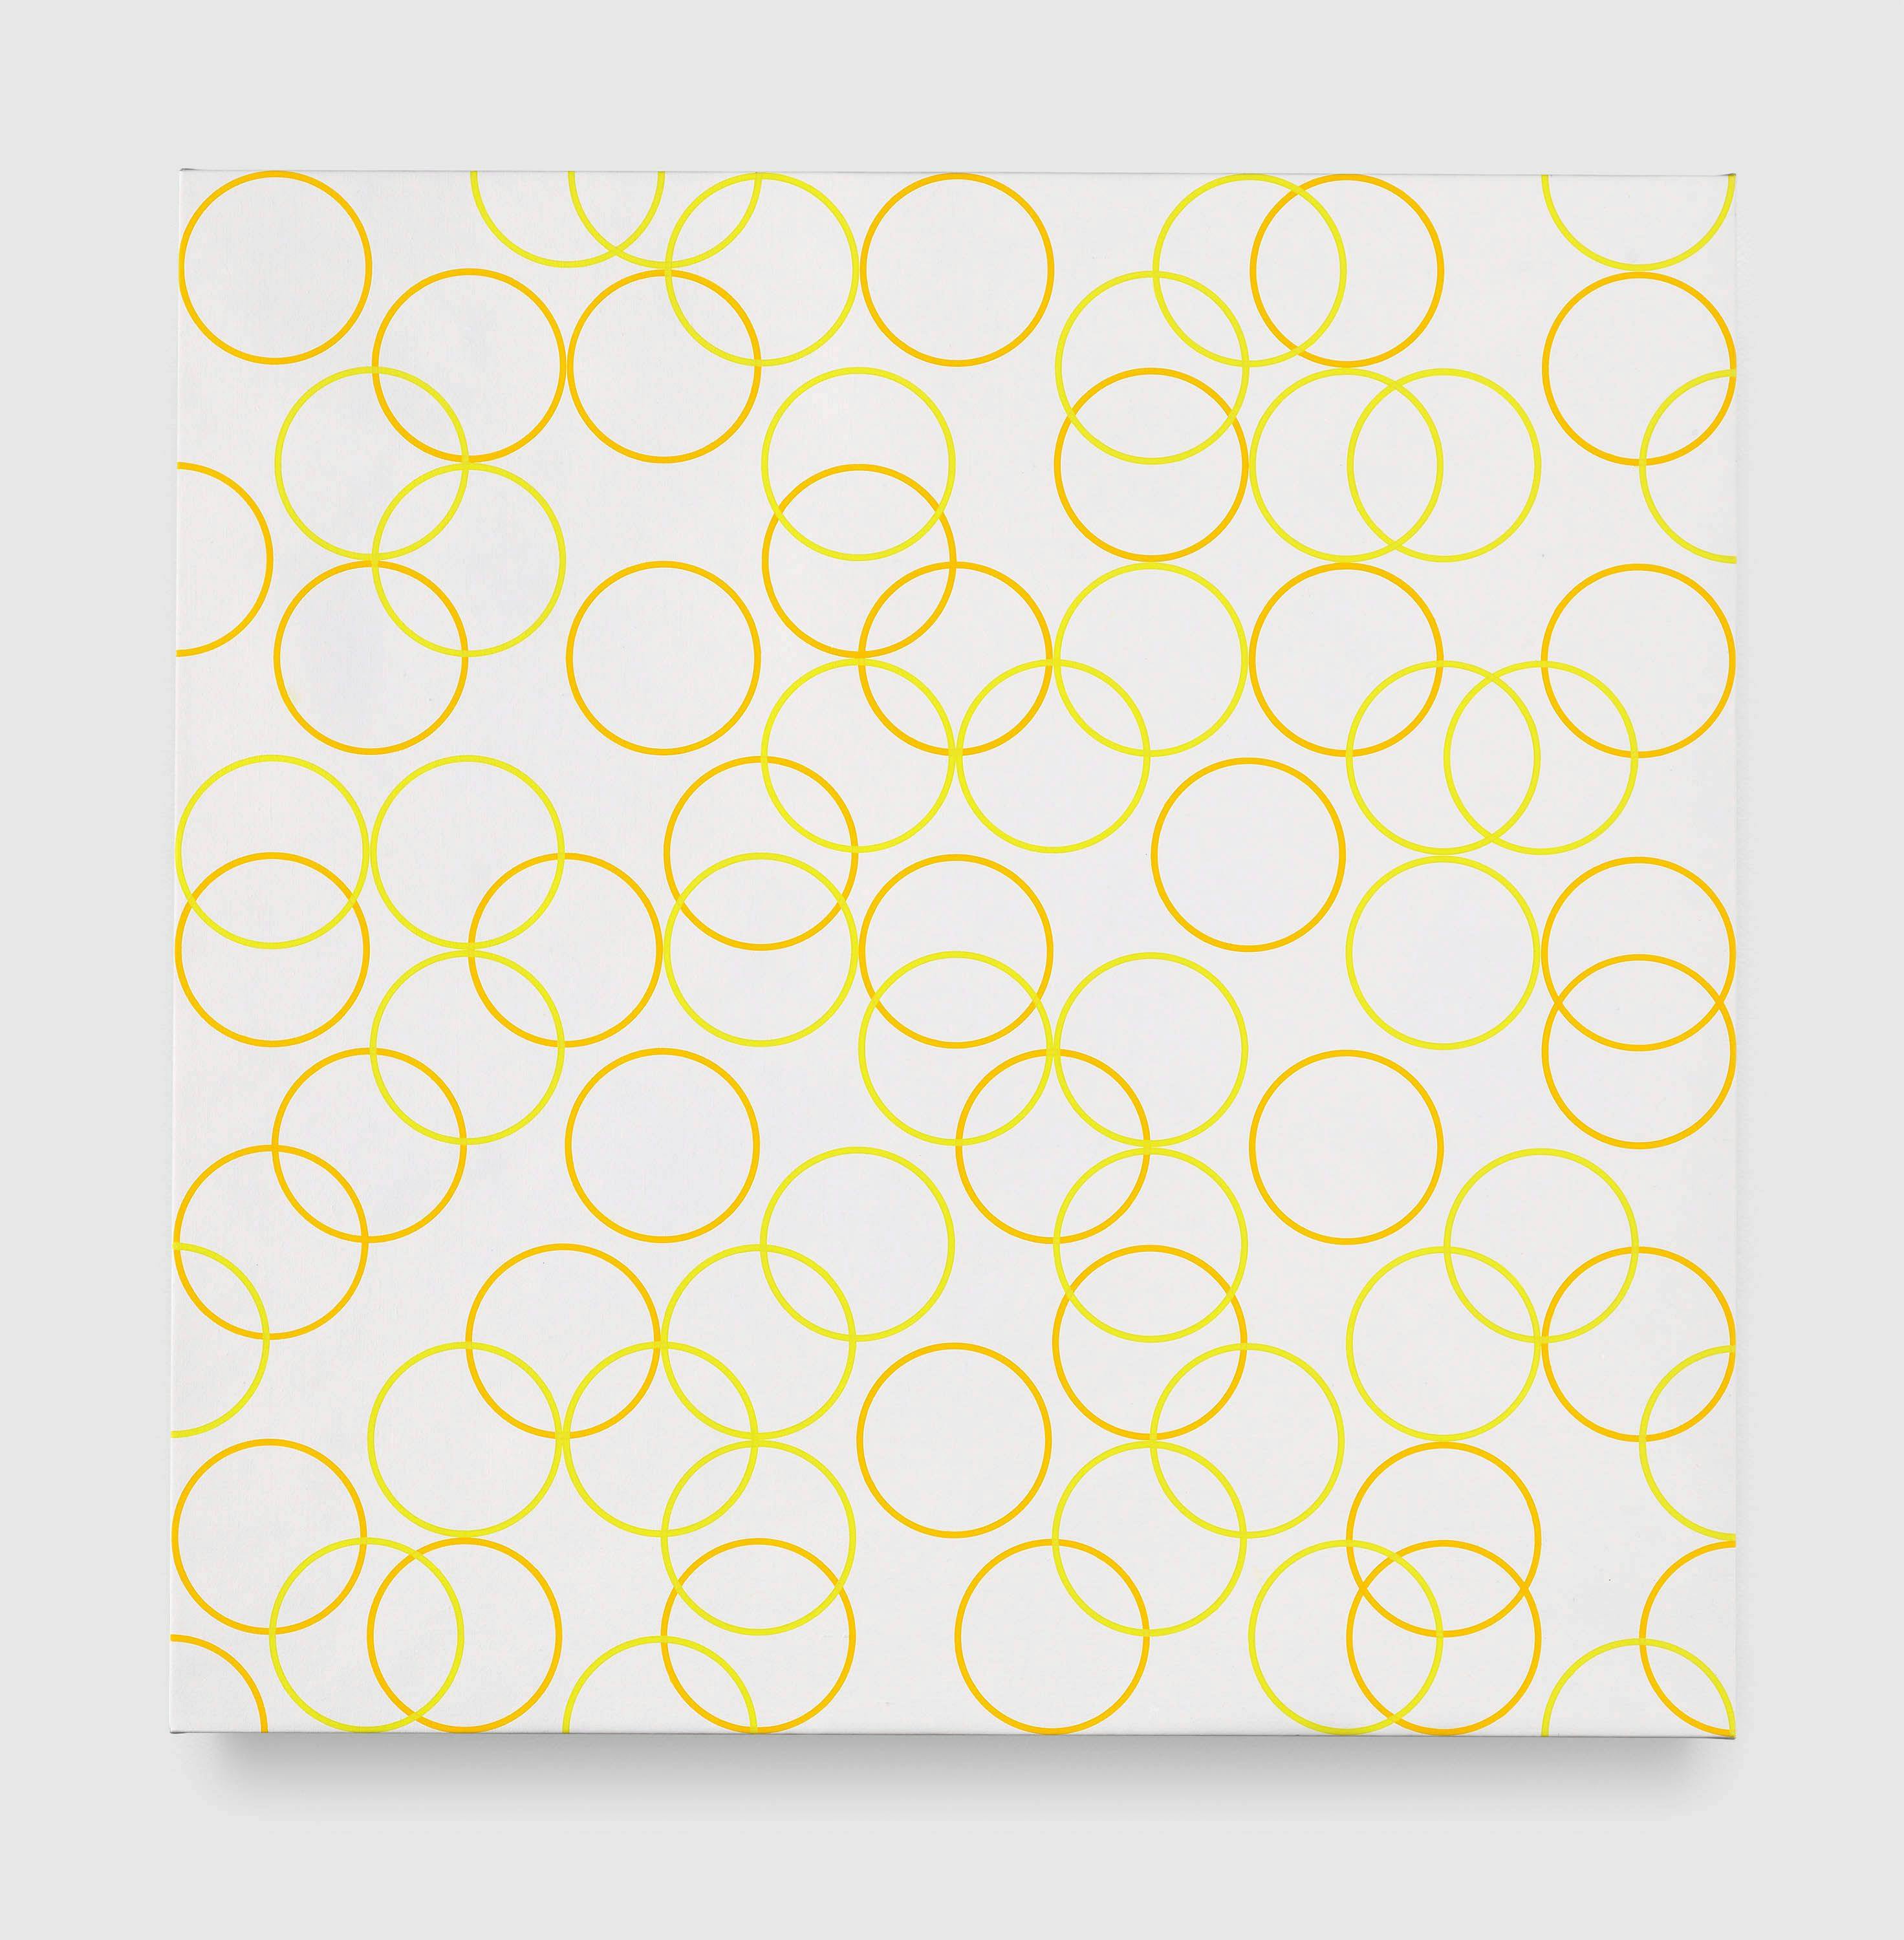 A painting by Bridget Riley, titled Two Yellows, Composition with Circles 5, dated 2011.